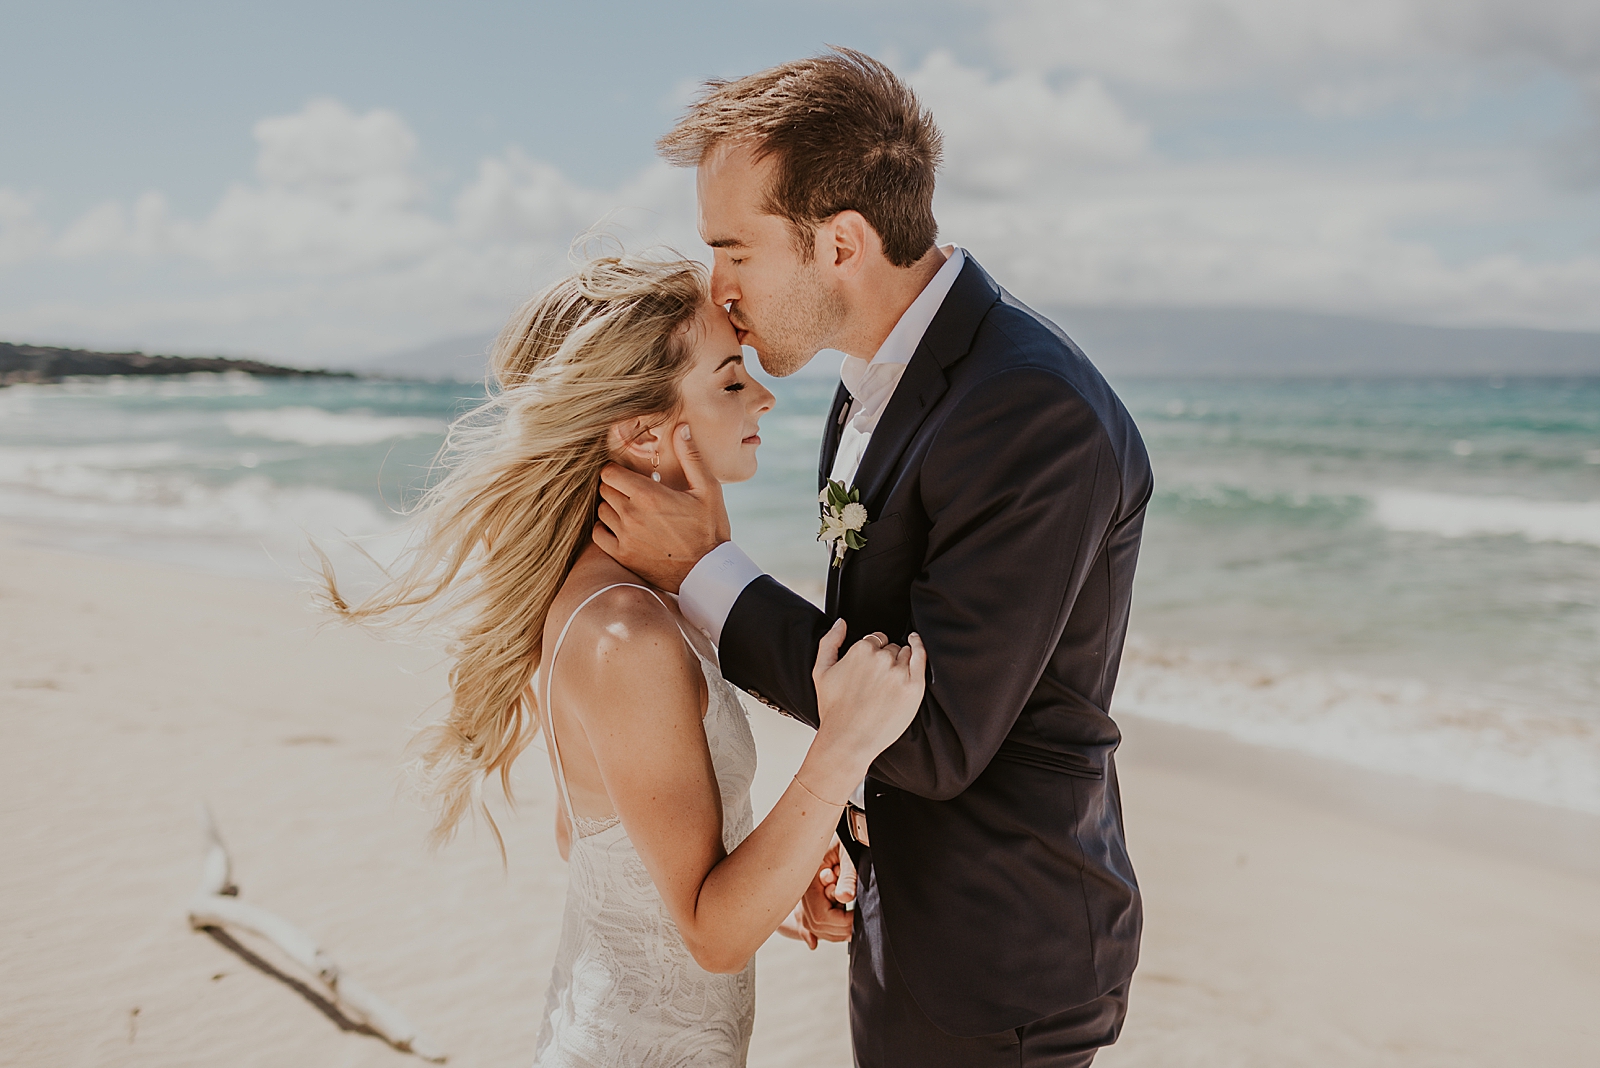 Groom holding Bride and kissing her on the forehead in front of the ocean